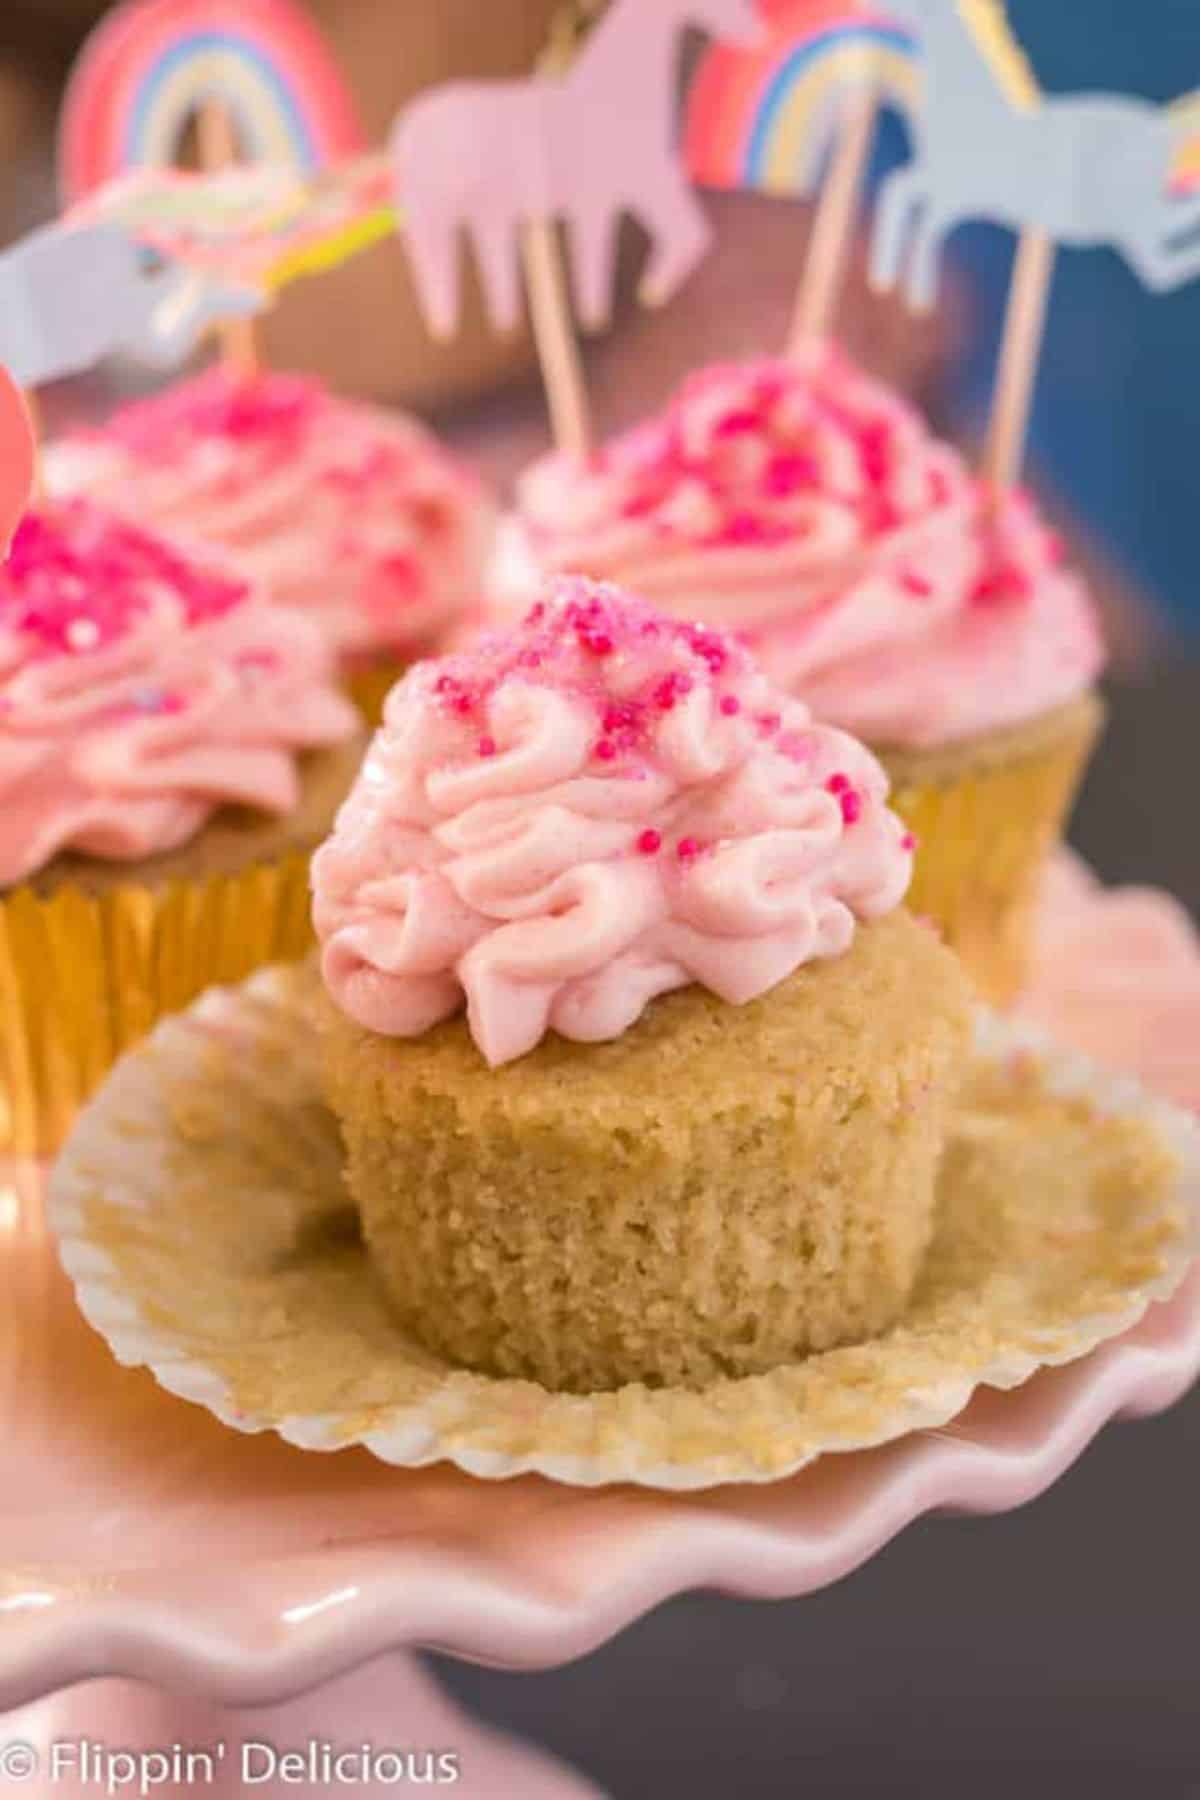 Scrumptious Gluten-Free Yellow Cupcakes on a pink cake tray.